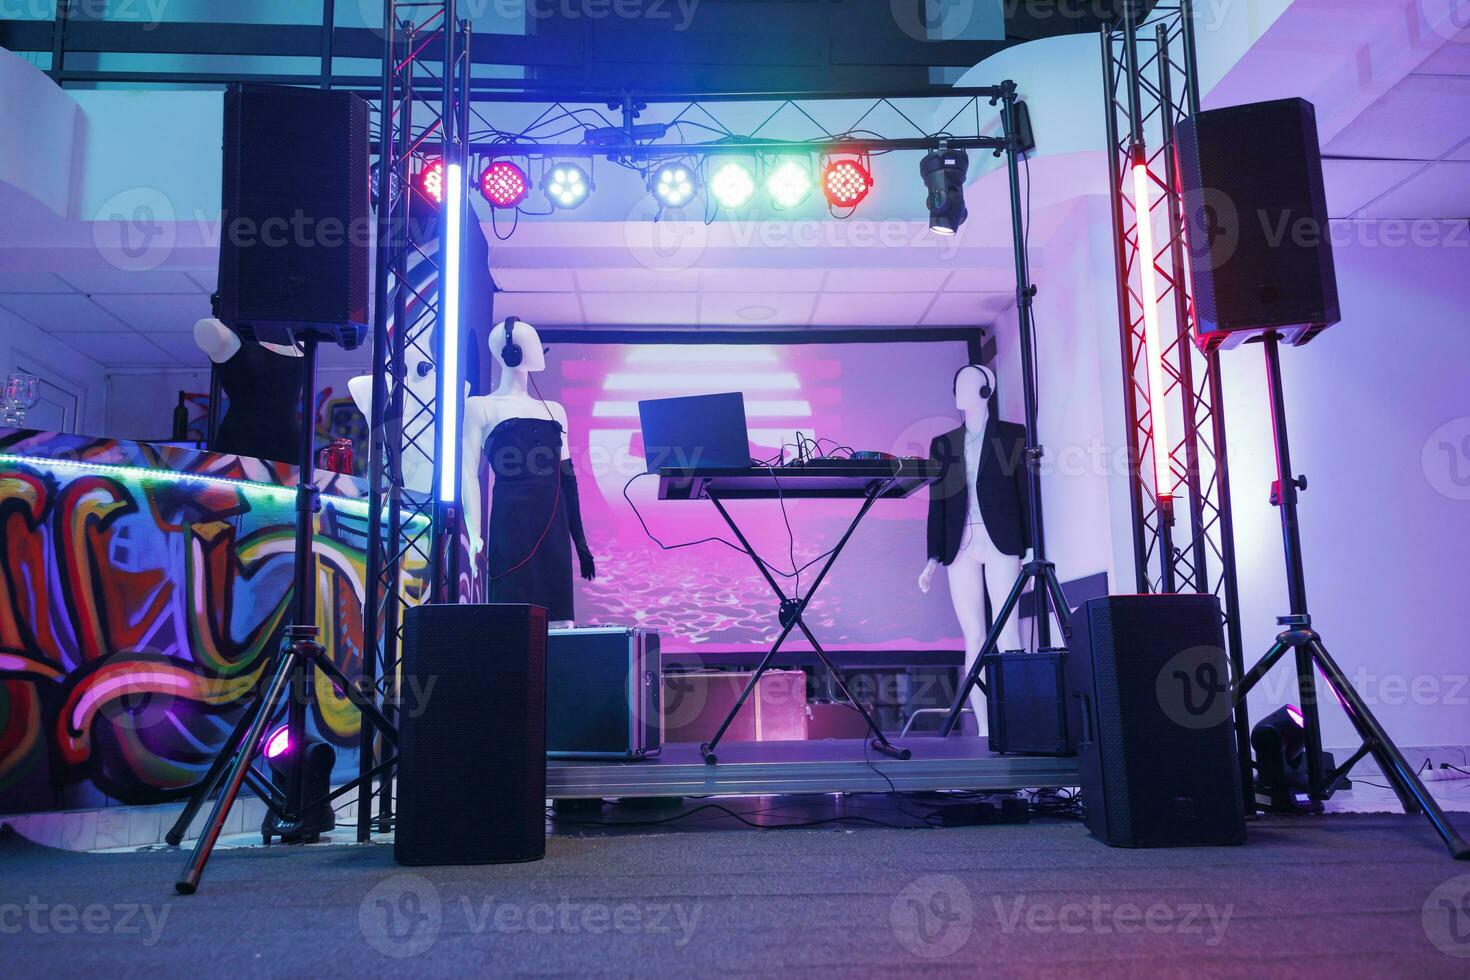 Dj controller on stage for discotheque in empty nightclub with no people. Electronic musician console equipment, loudspeakers and spotlights for live music concert in dark club. photo